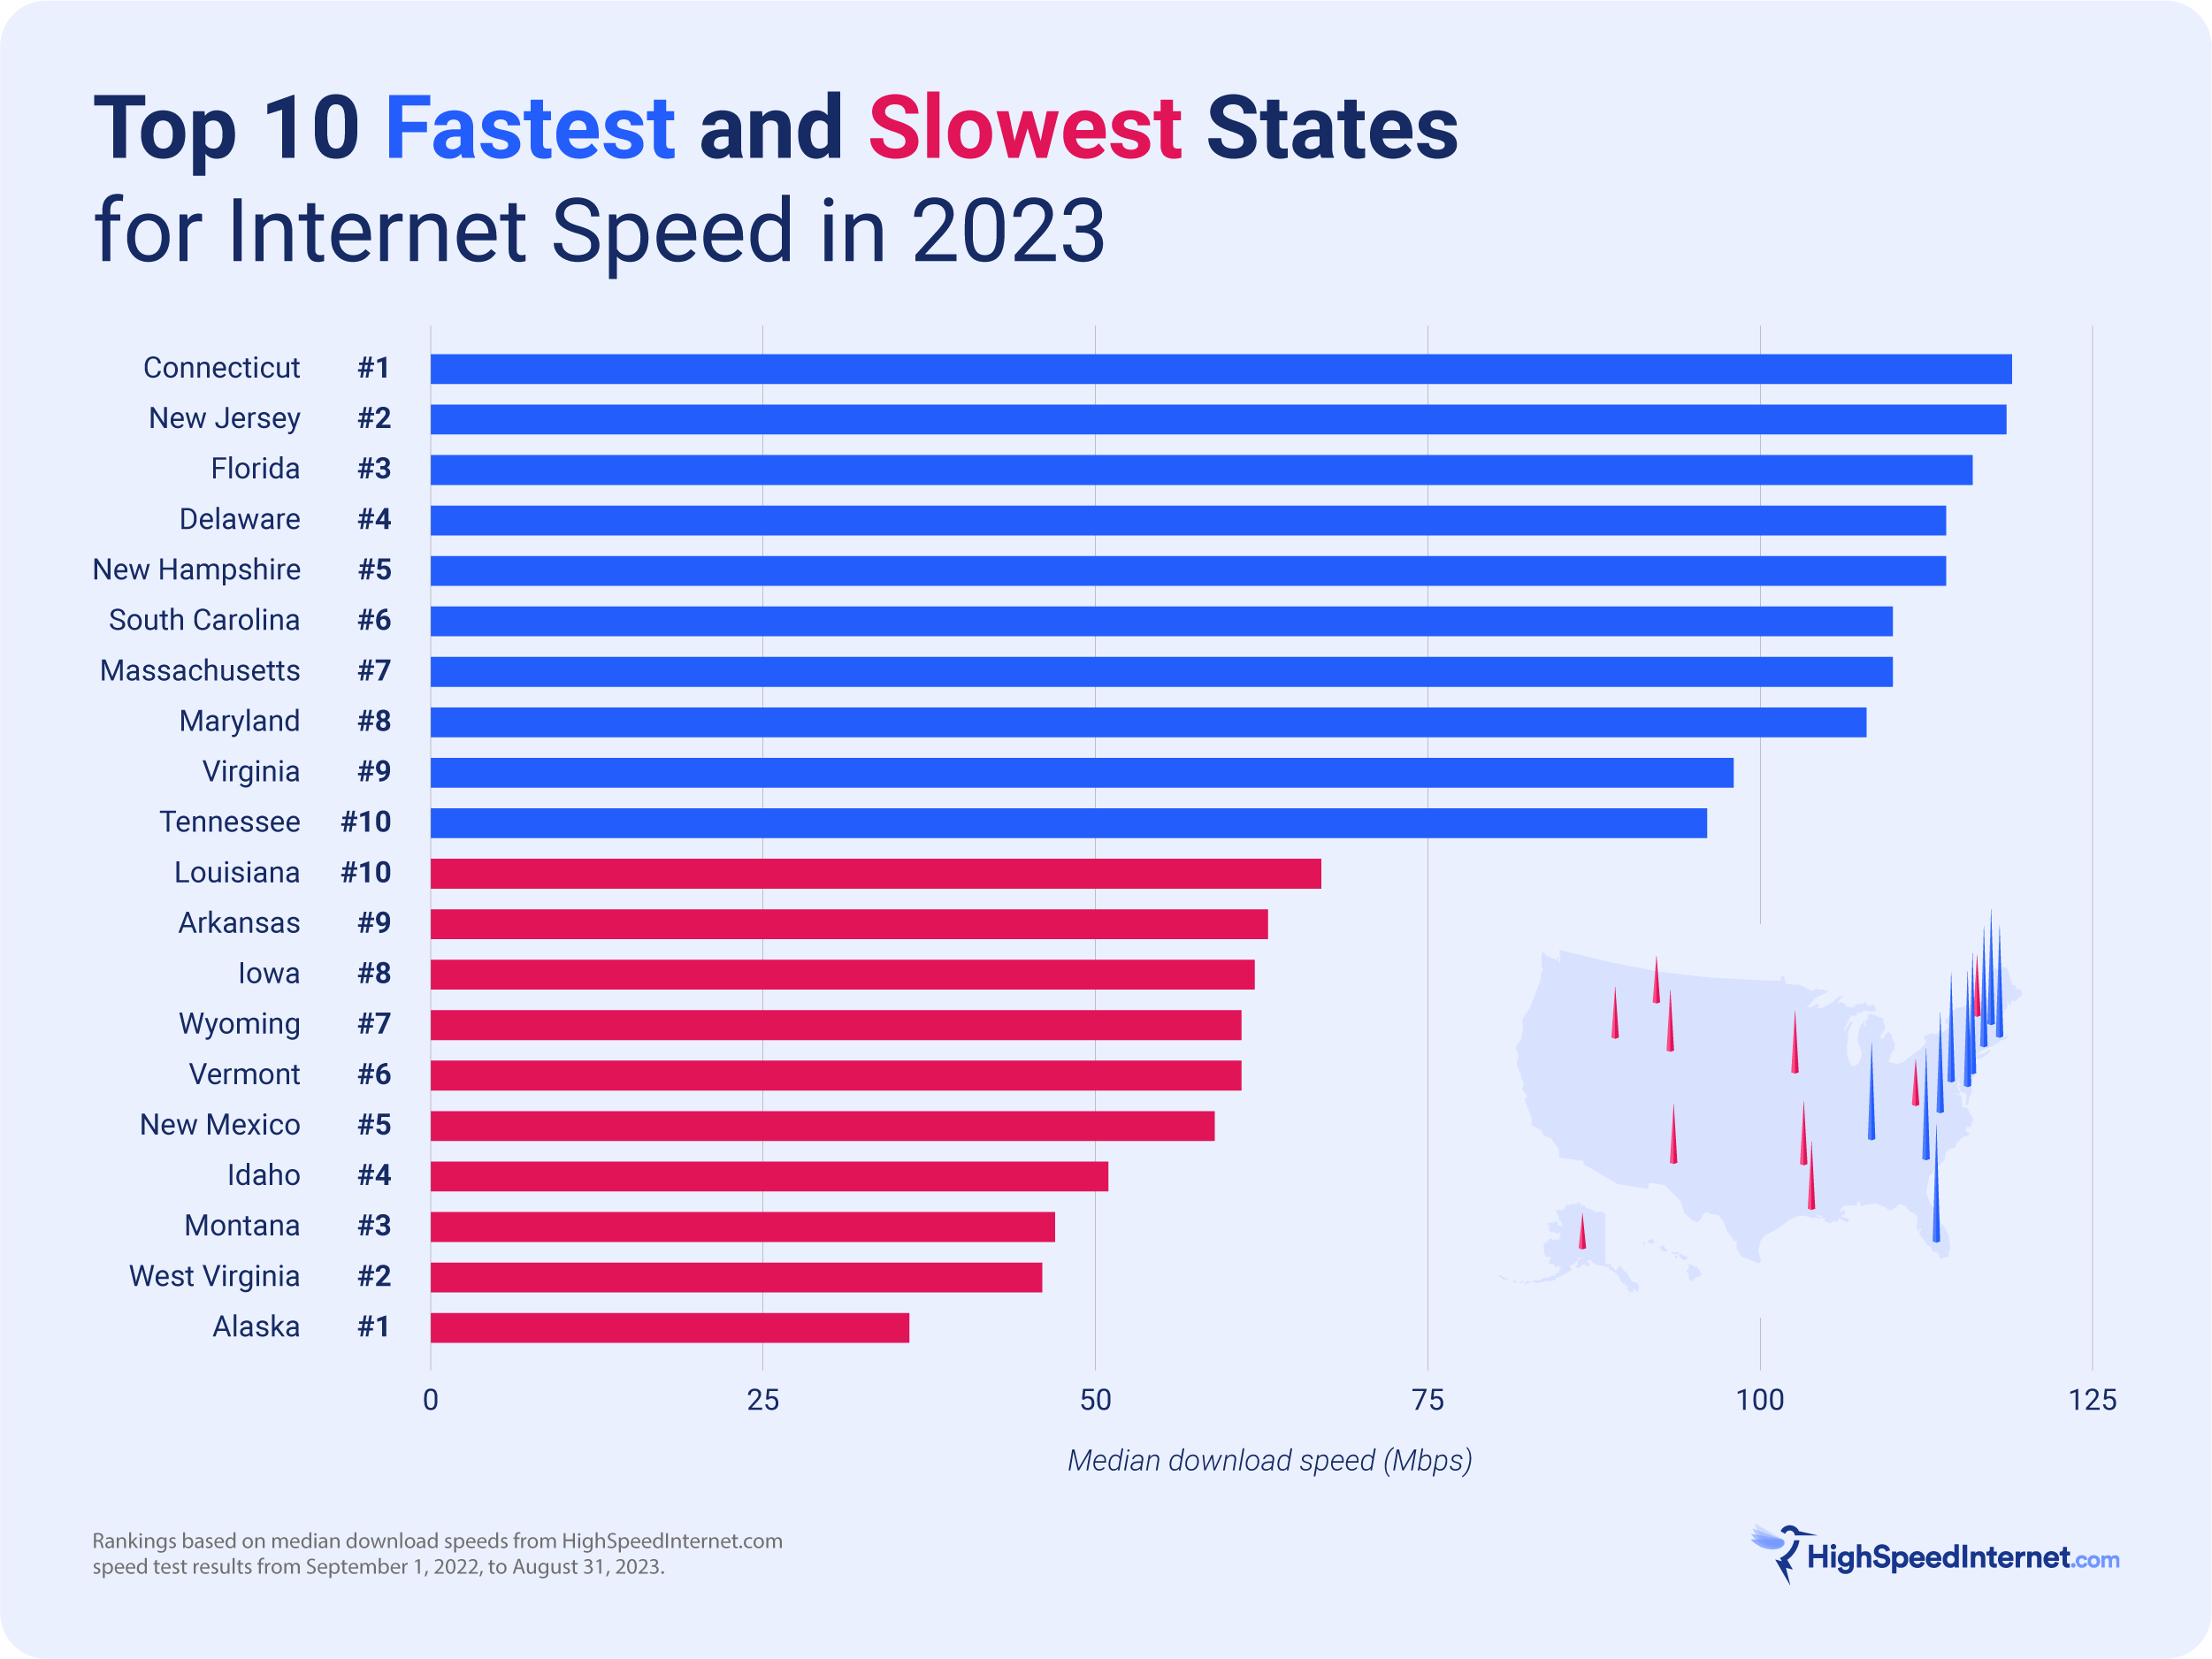 The 10 Fastest and Slowest States for Speeds in 2023